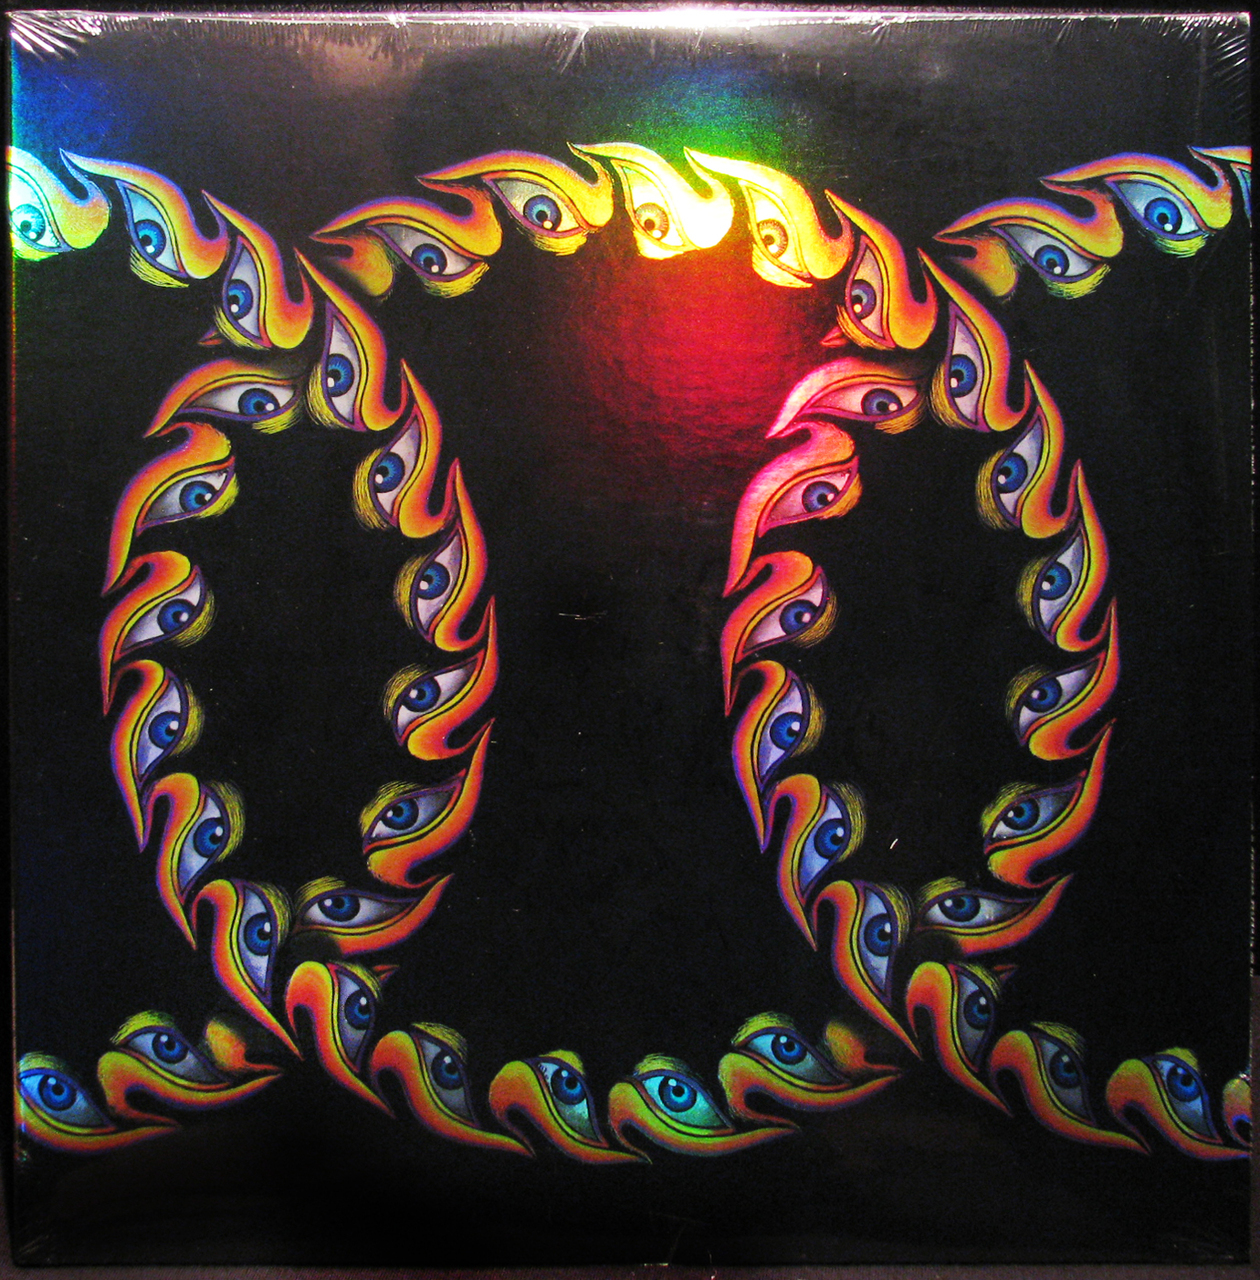 https://musiczone.ie/wp-content/uploads/2016/05/Tool-Lateralus.jpg